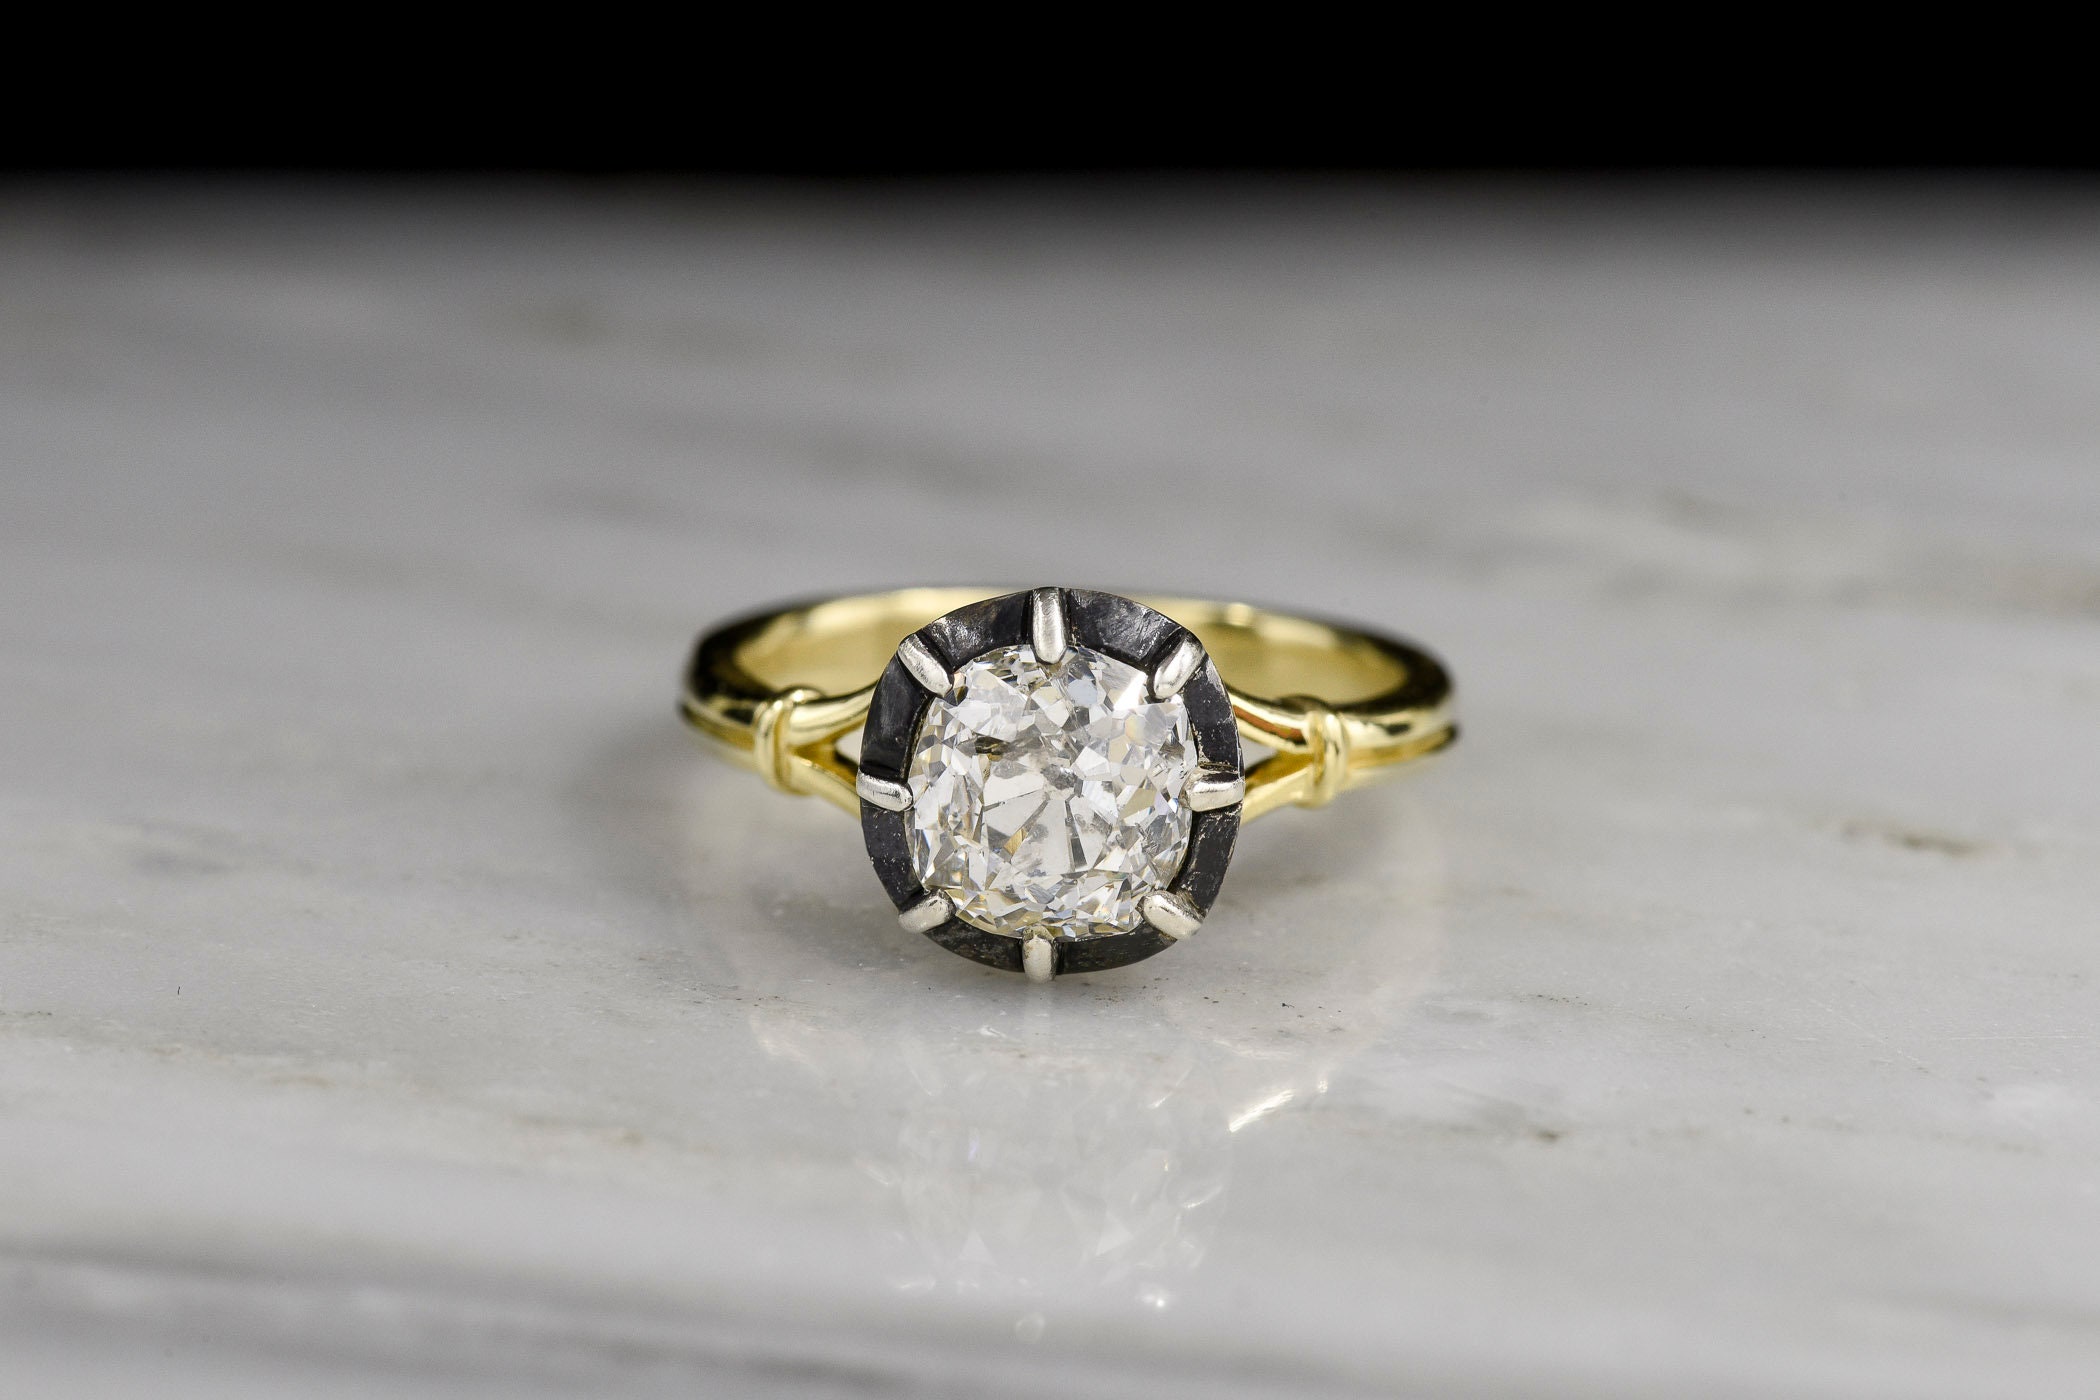 Old Mine Cut Antique Cushion Cut Moissanite Engagement Ring, 3.5 CT  Elongated Cushion Cut Ring, OMC Cushion Cut Engagement Ring - Etsy |  Moissanite engagement ring cushion cut, Antique cushion engagement ring,